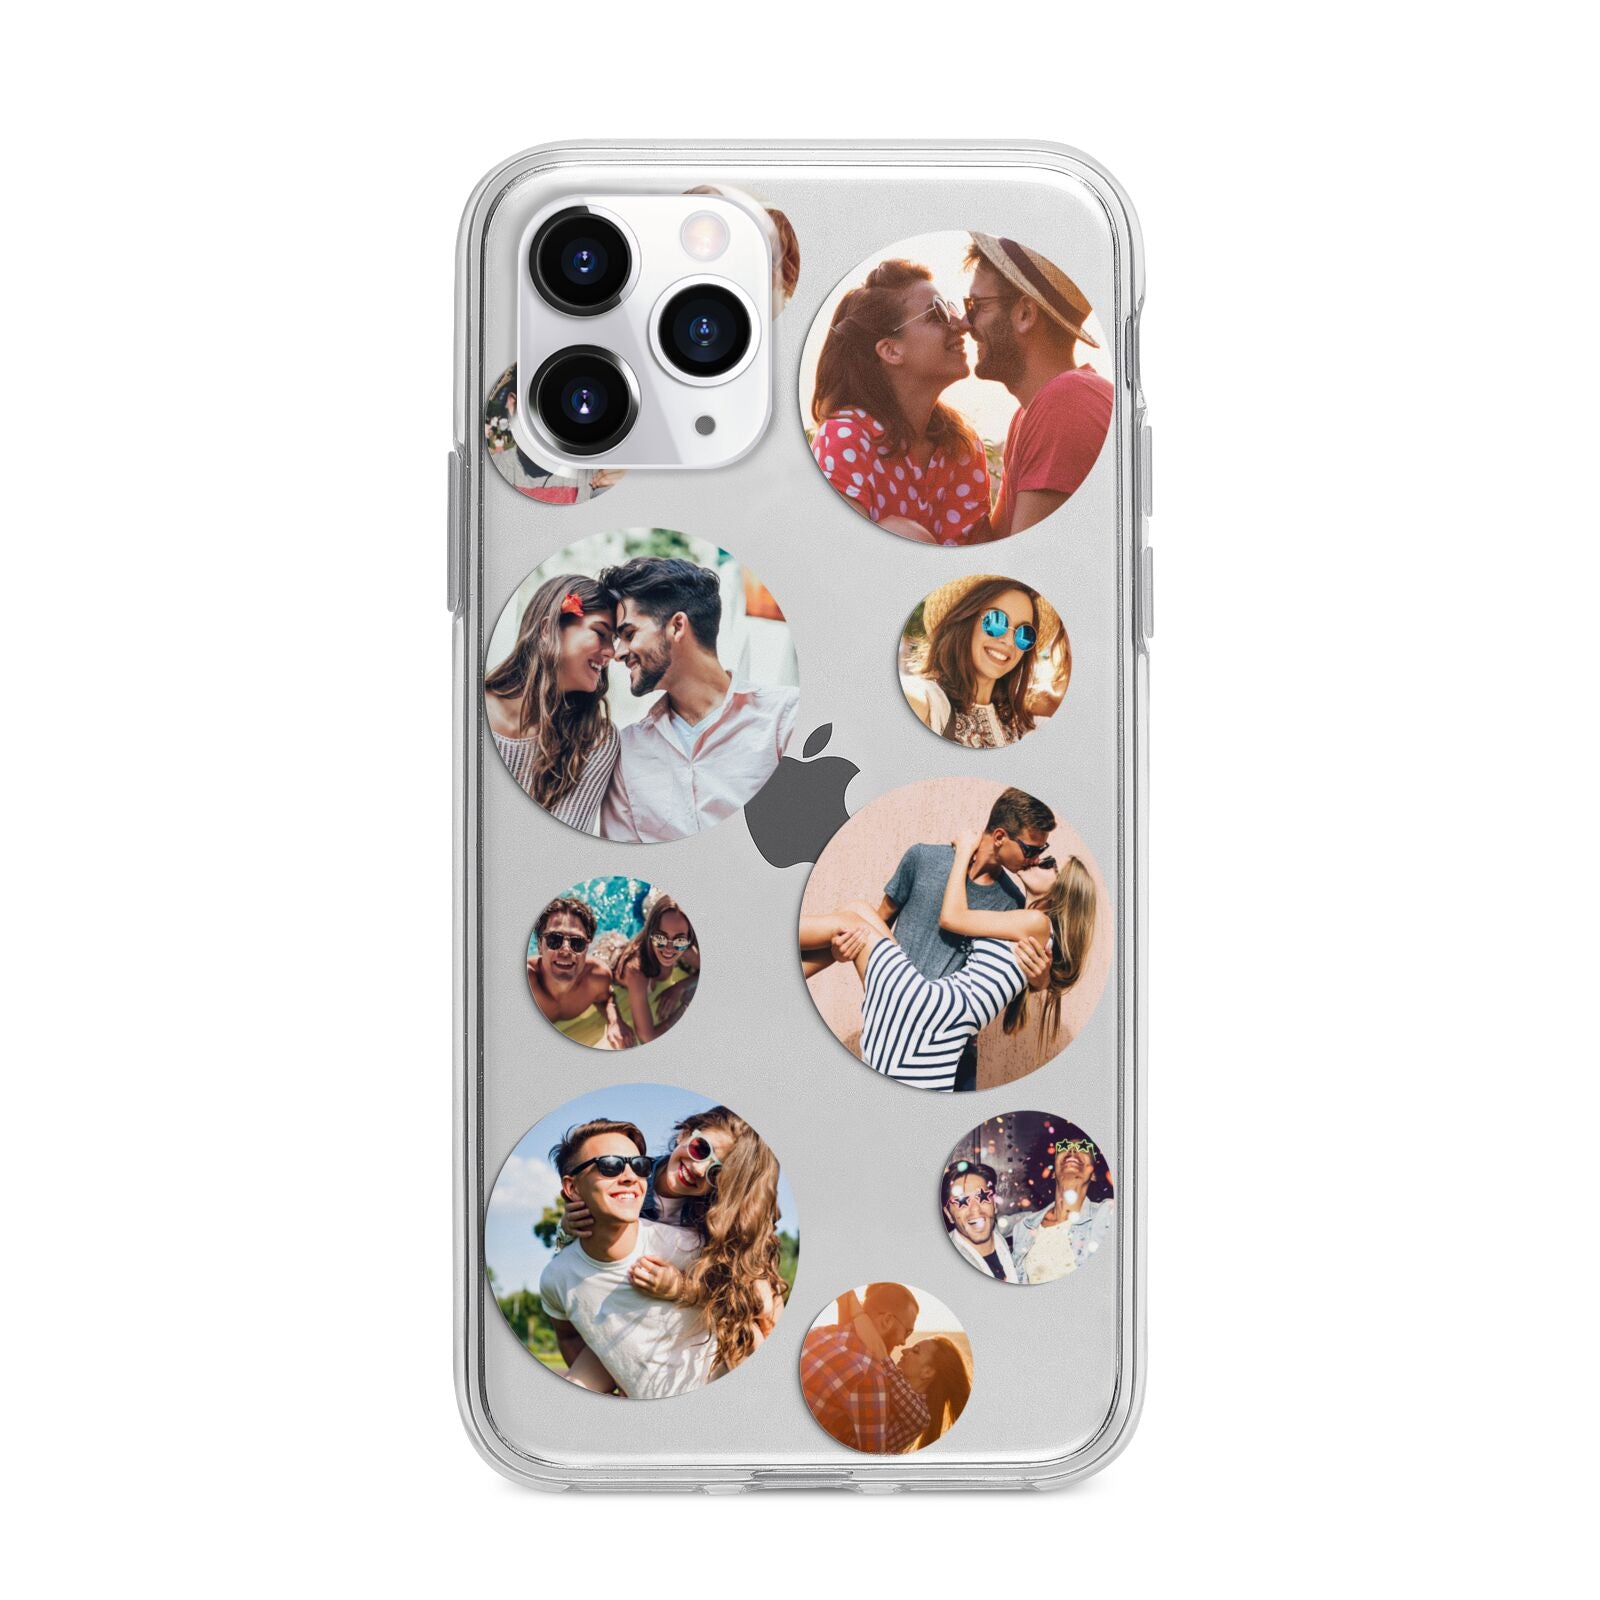 Multi Circular Photo Collage Upload Apple iPhone 11 Pro Max in Silver with Bumper Case